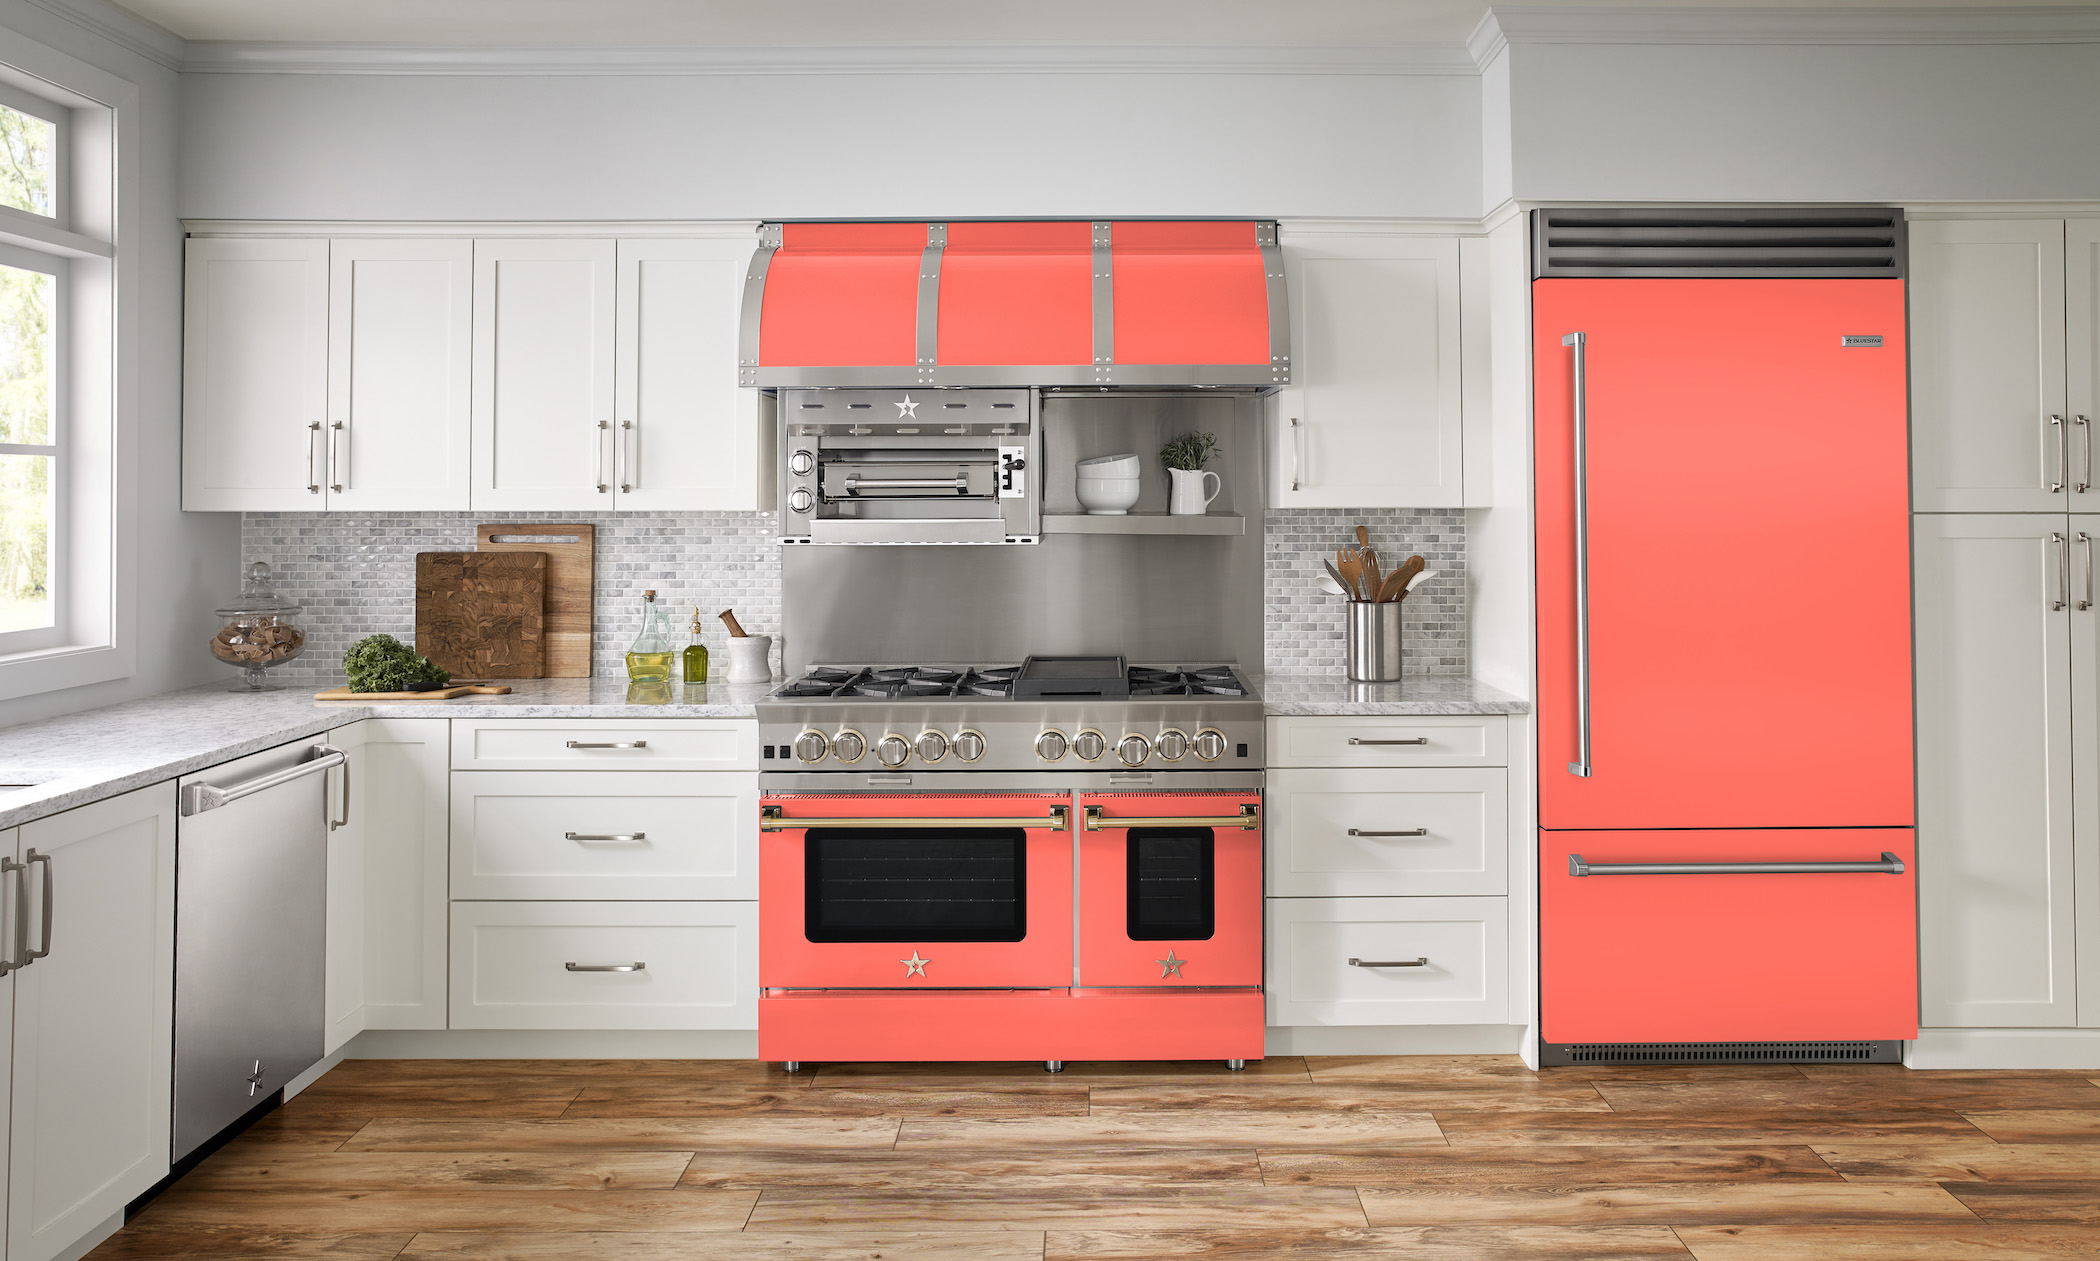 Showcasing its color-matching prowess, BlueStar’s full kitchen appliance suite is now available in a brilliant hue inspired by Pantone’s 2019 Color of the Year, Living Coral. 